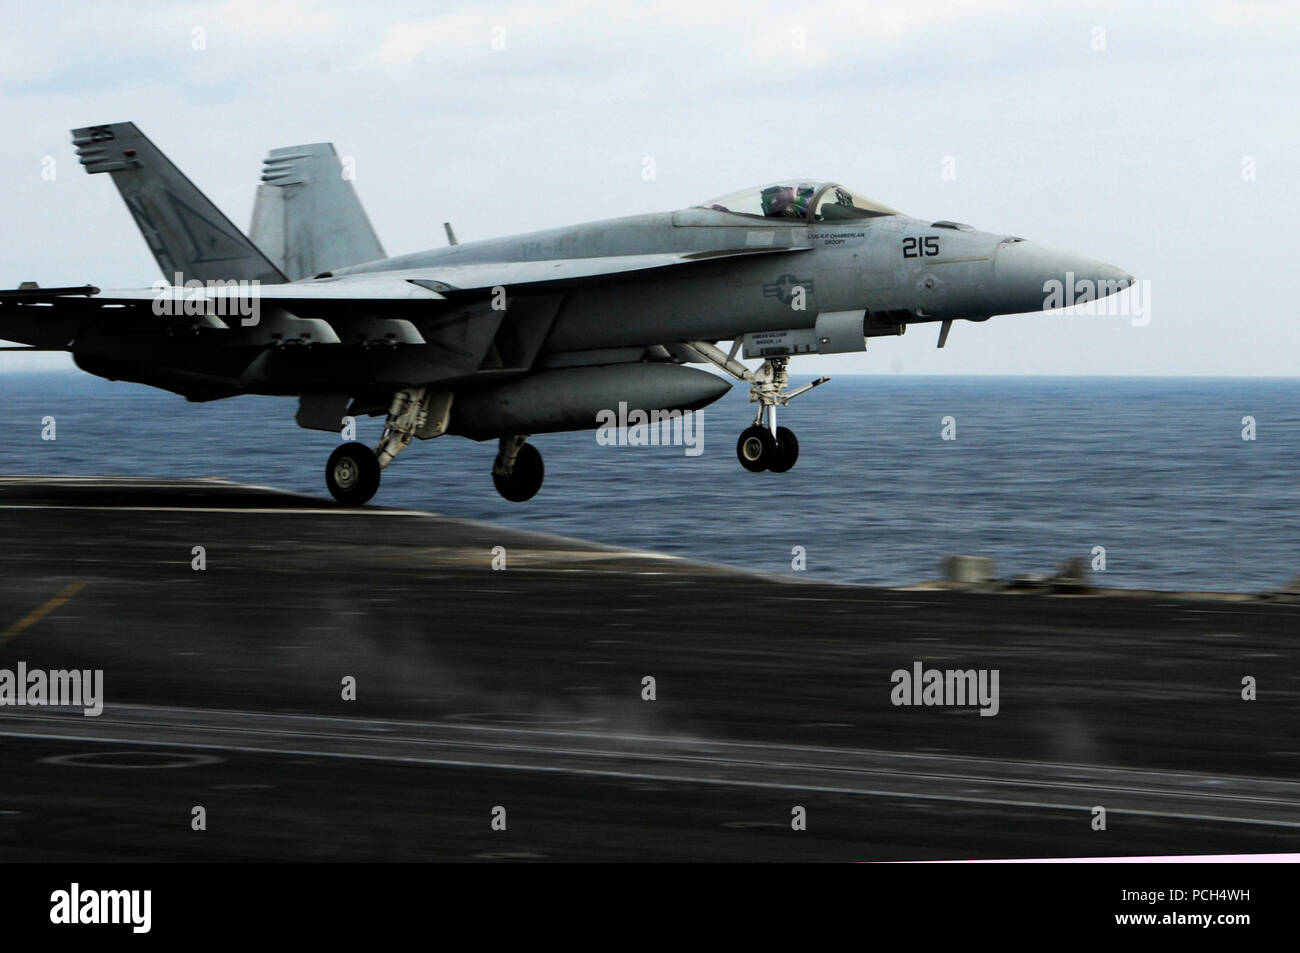 An F/A-18E Super Hornet assigned to the 'Tophatters' of Strike Fighter Squadron 14 launches from the flight deck aboard the aircraft carrier USS Nimitz. The Nimitz Carrier Strike Group is conducting operations in the U.S. 7th Fleet area of responsibility in support of Maritime Strategy. Stock Photo